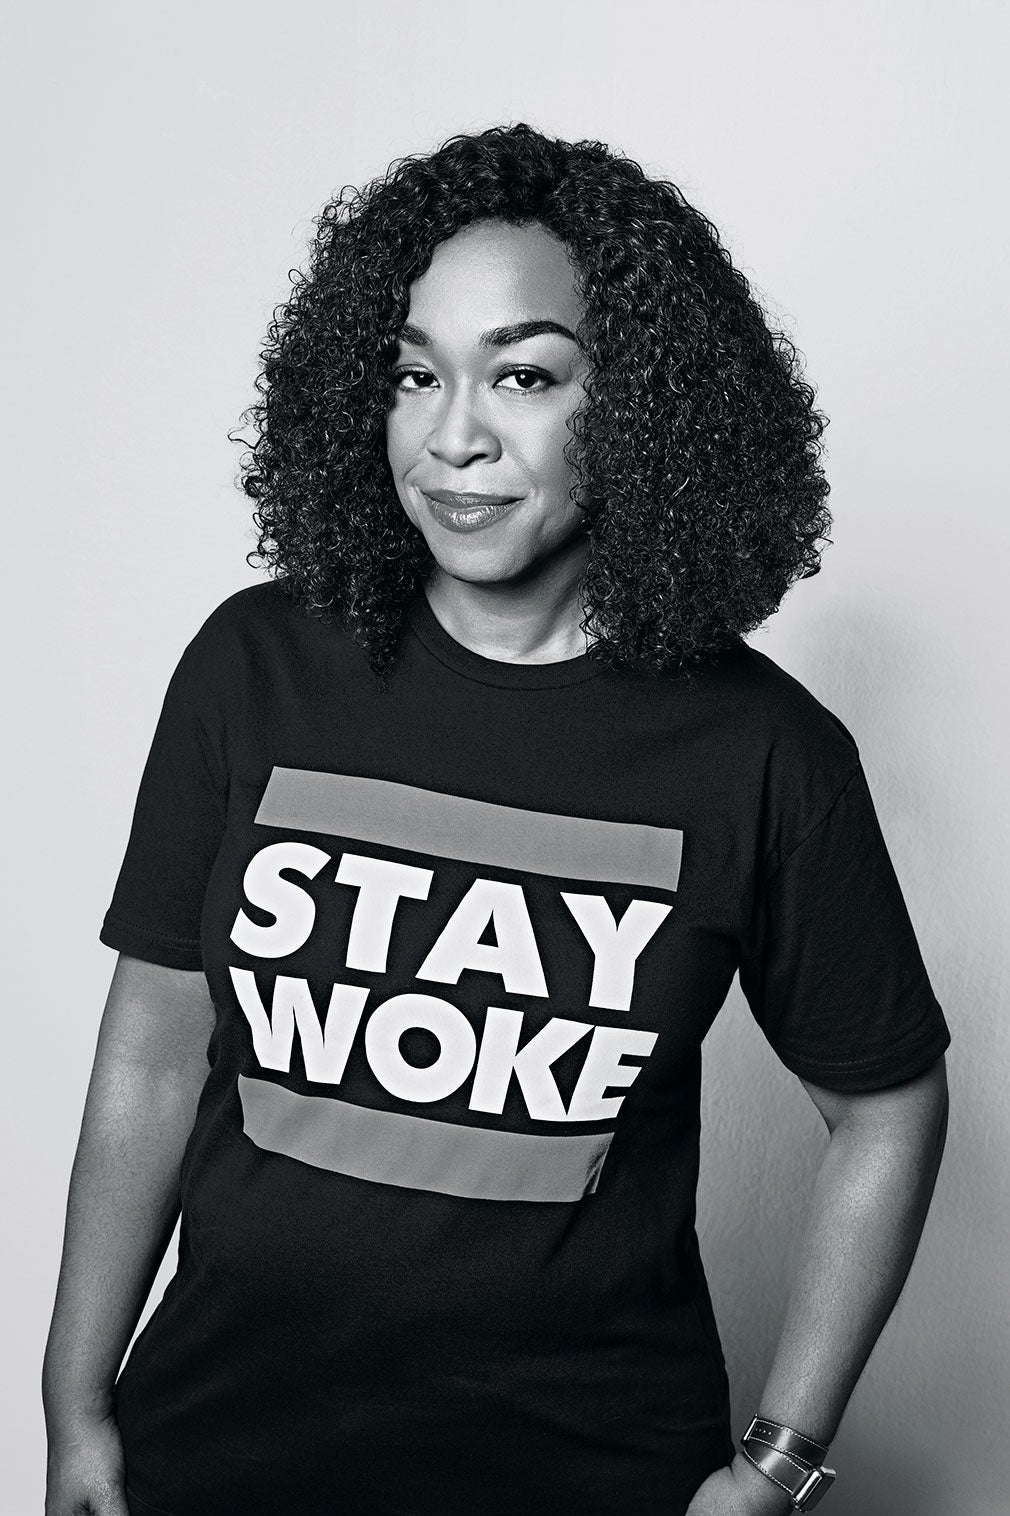 From The Front Lines To Hollywood: These Influential Women Share What It Means To Be 'Woke'
